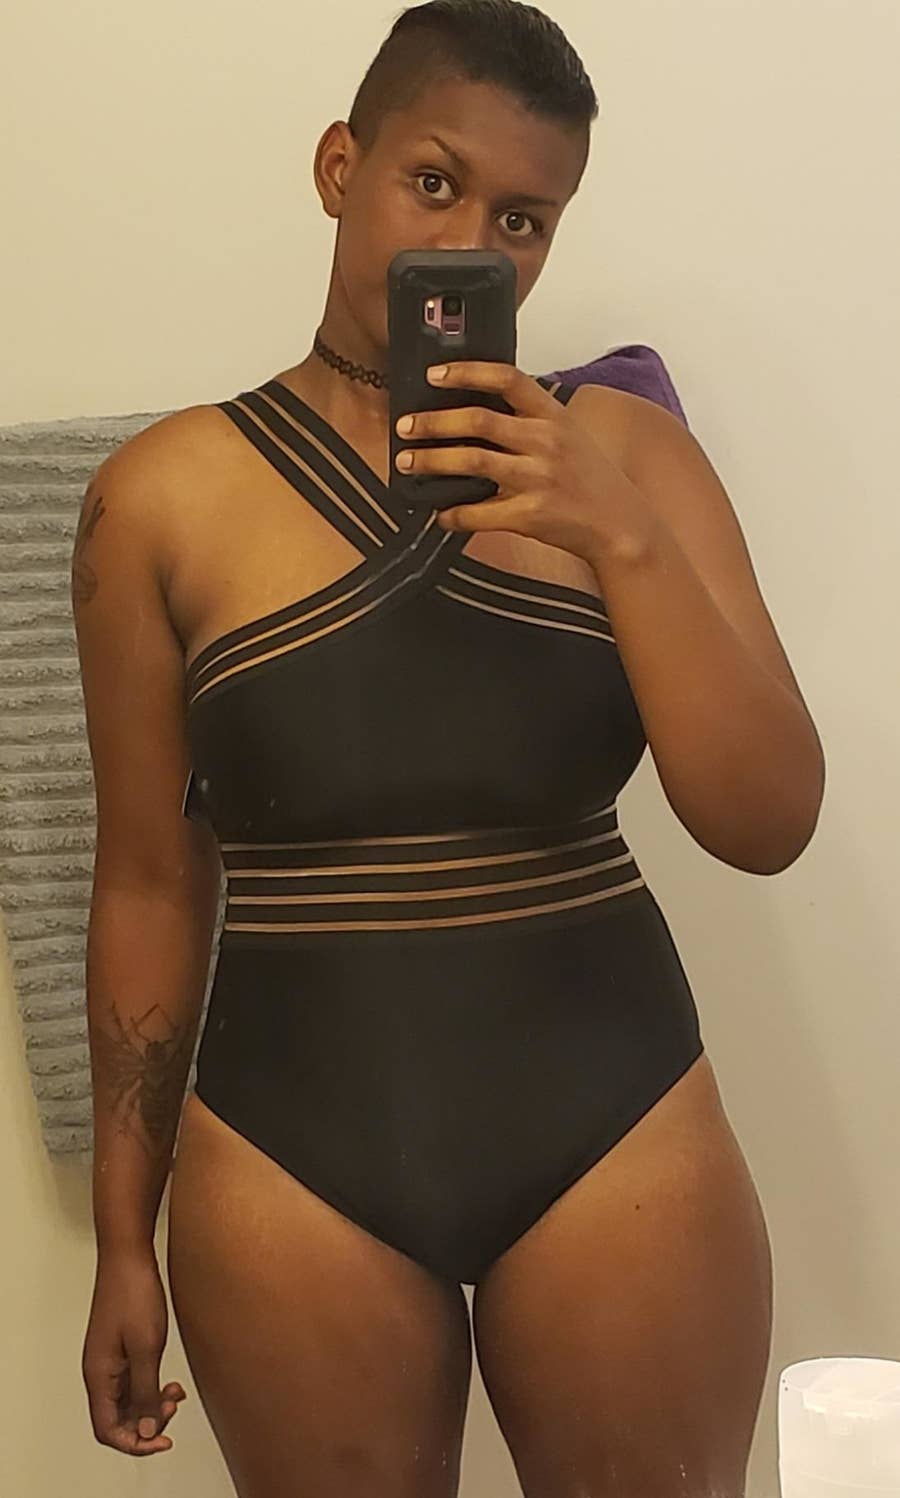 I have big boobs and it's tough finding swimwear - I struggle wearing  halter neck tops as they kill for this reason